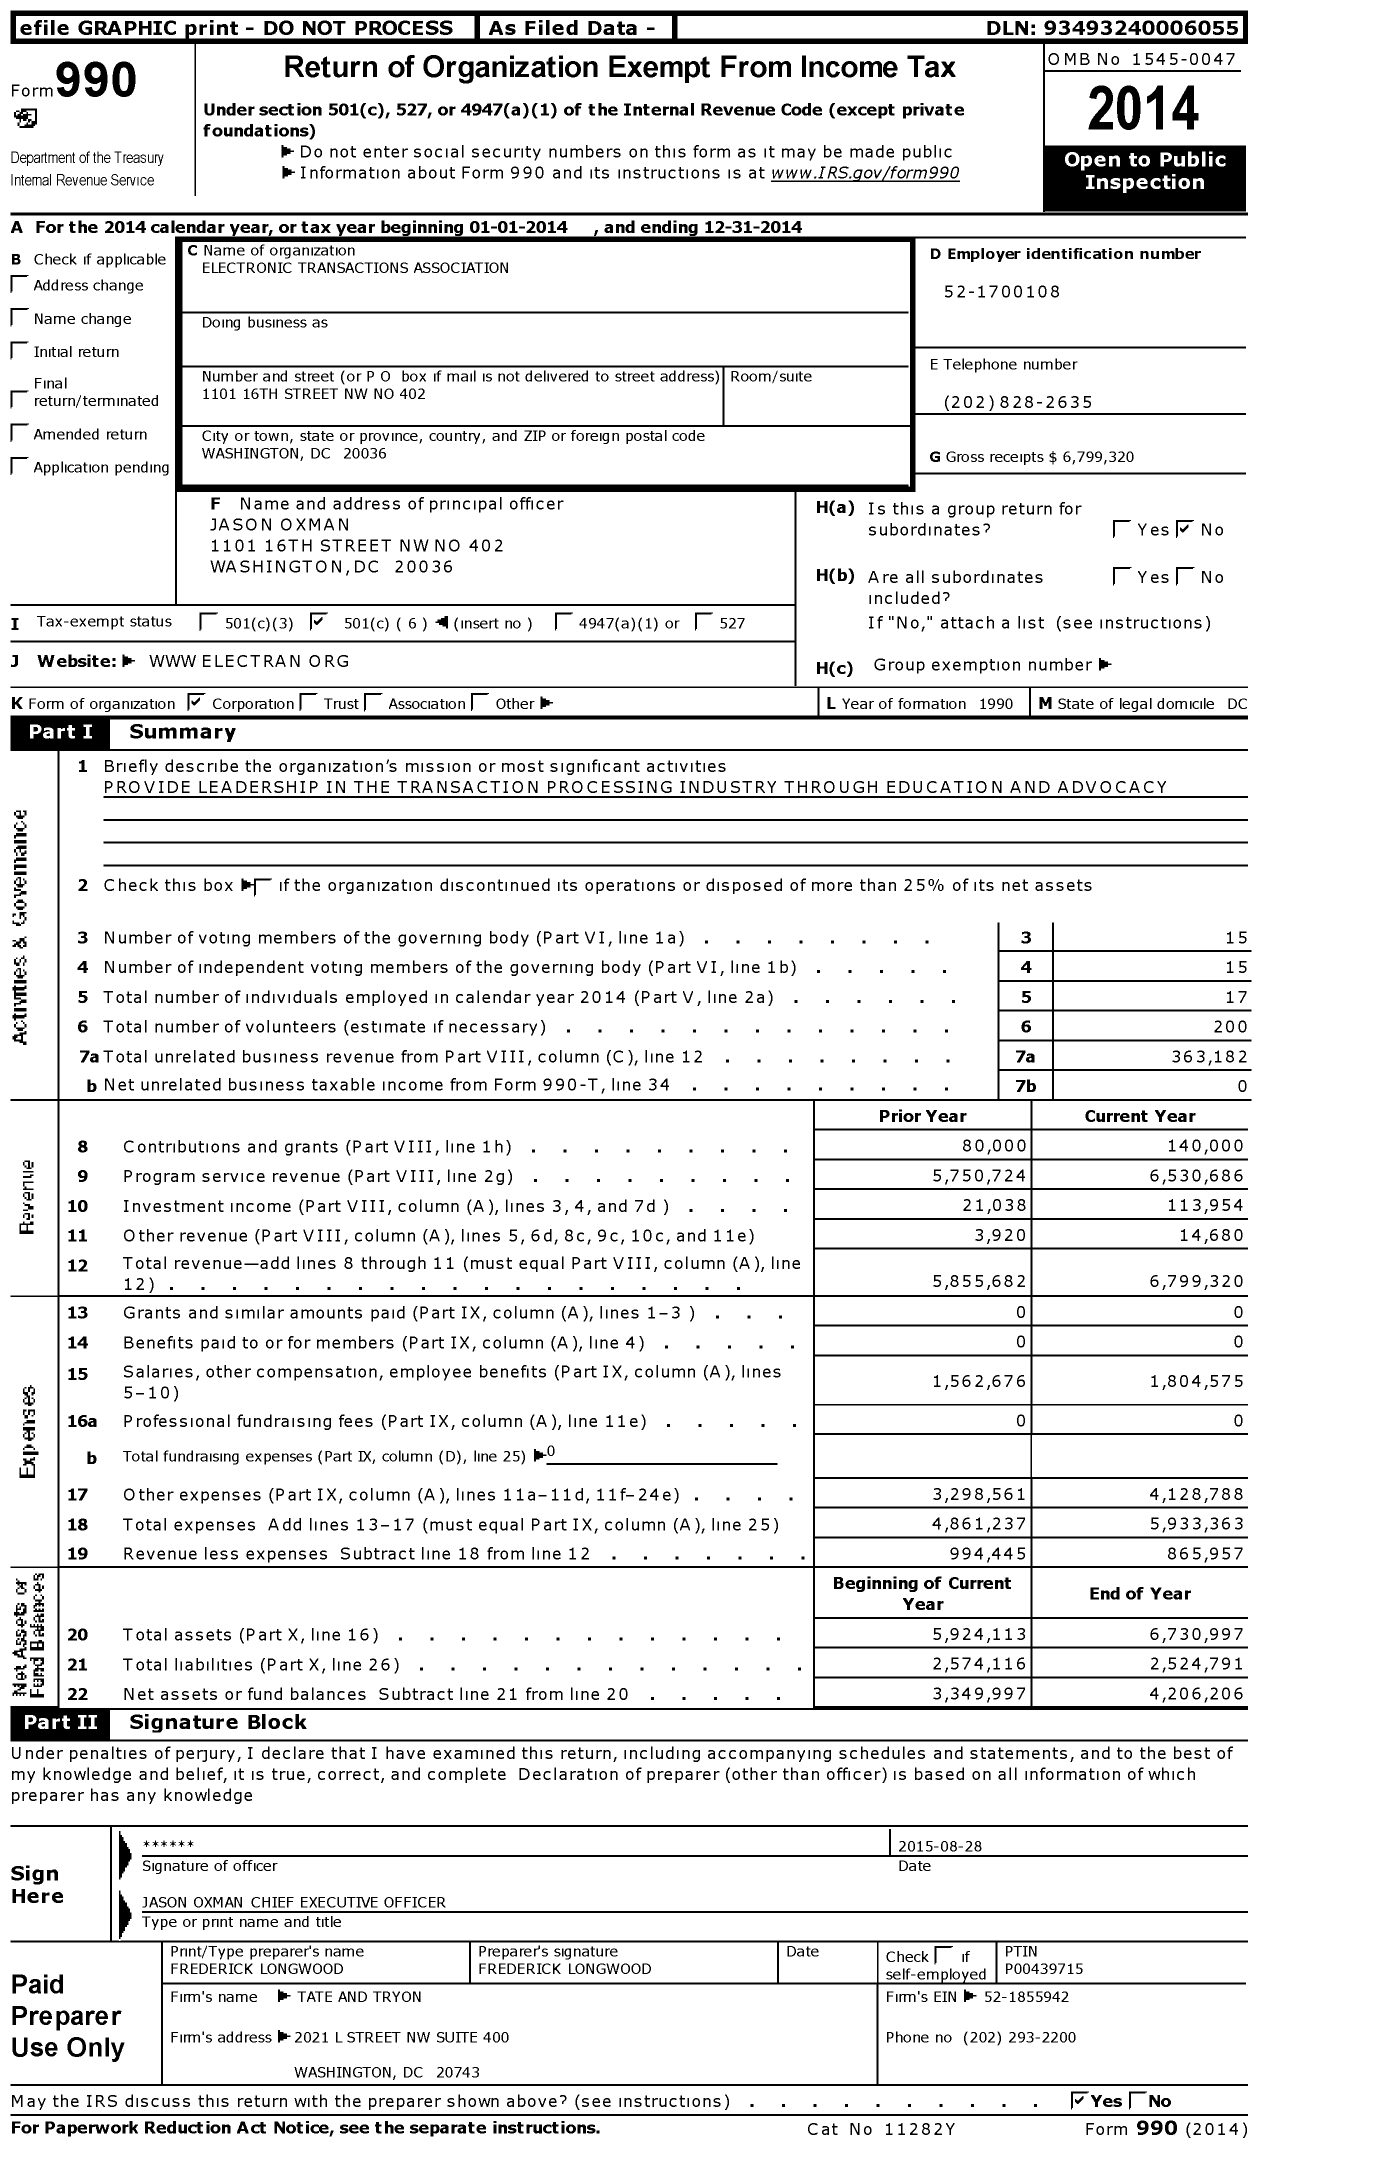 Image of first page of 2014 Form 990O for Electronic Transactions Association (ETA)